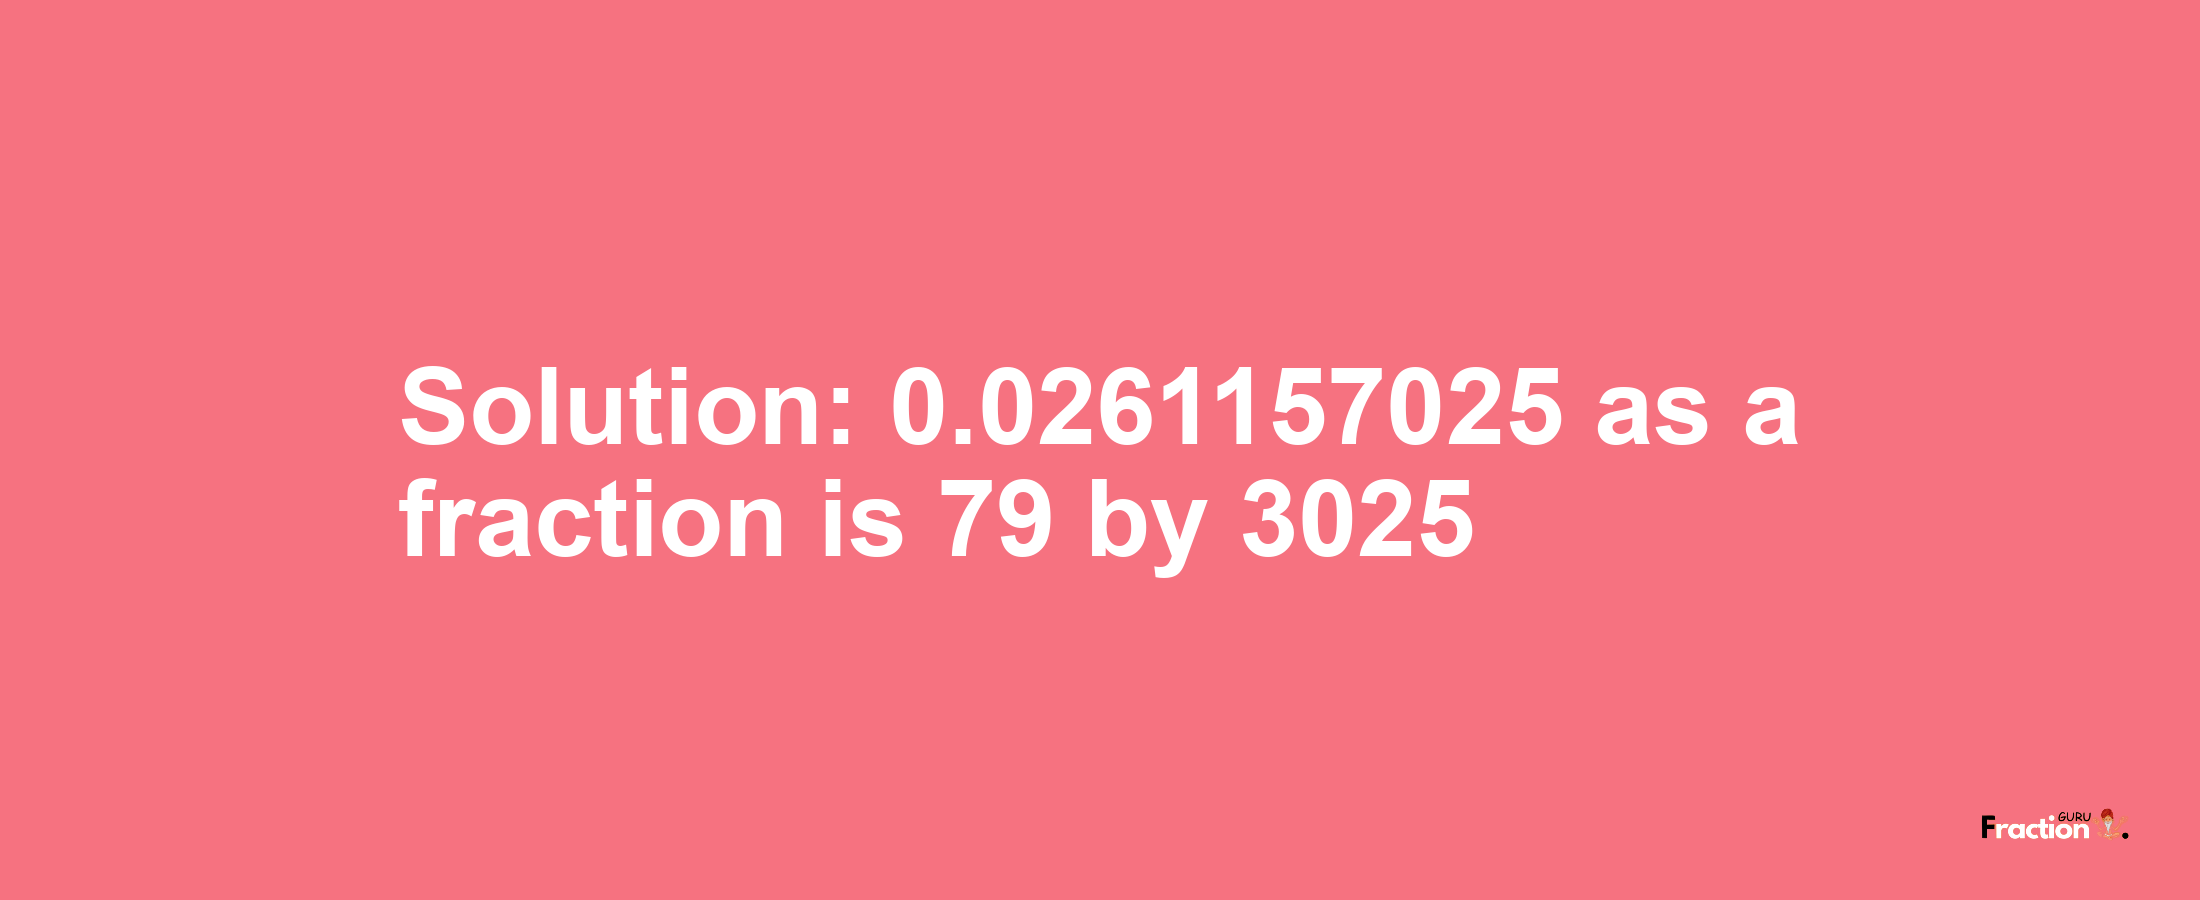 Solution:0.0261157025 as a fraction is 79/3025